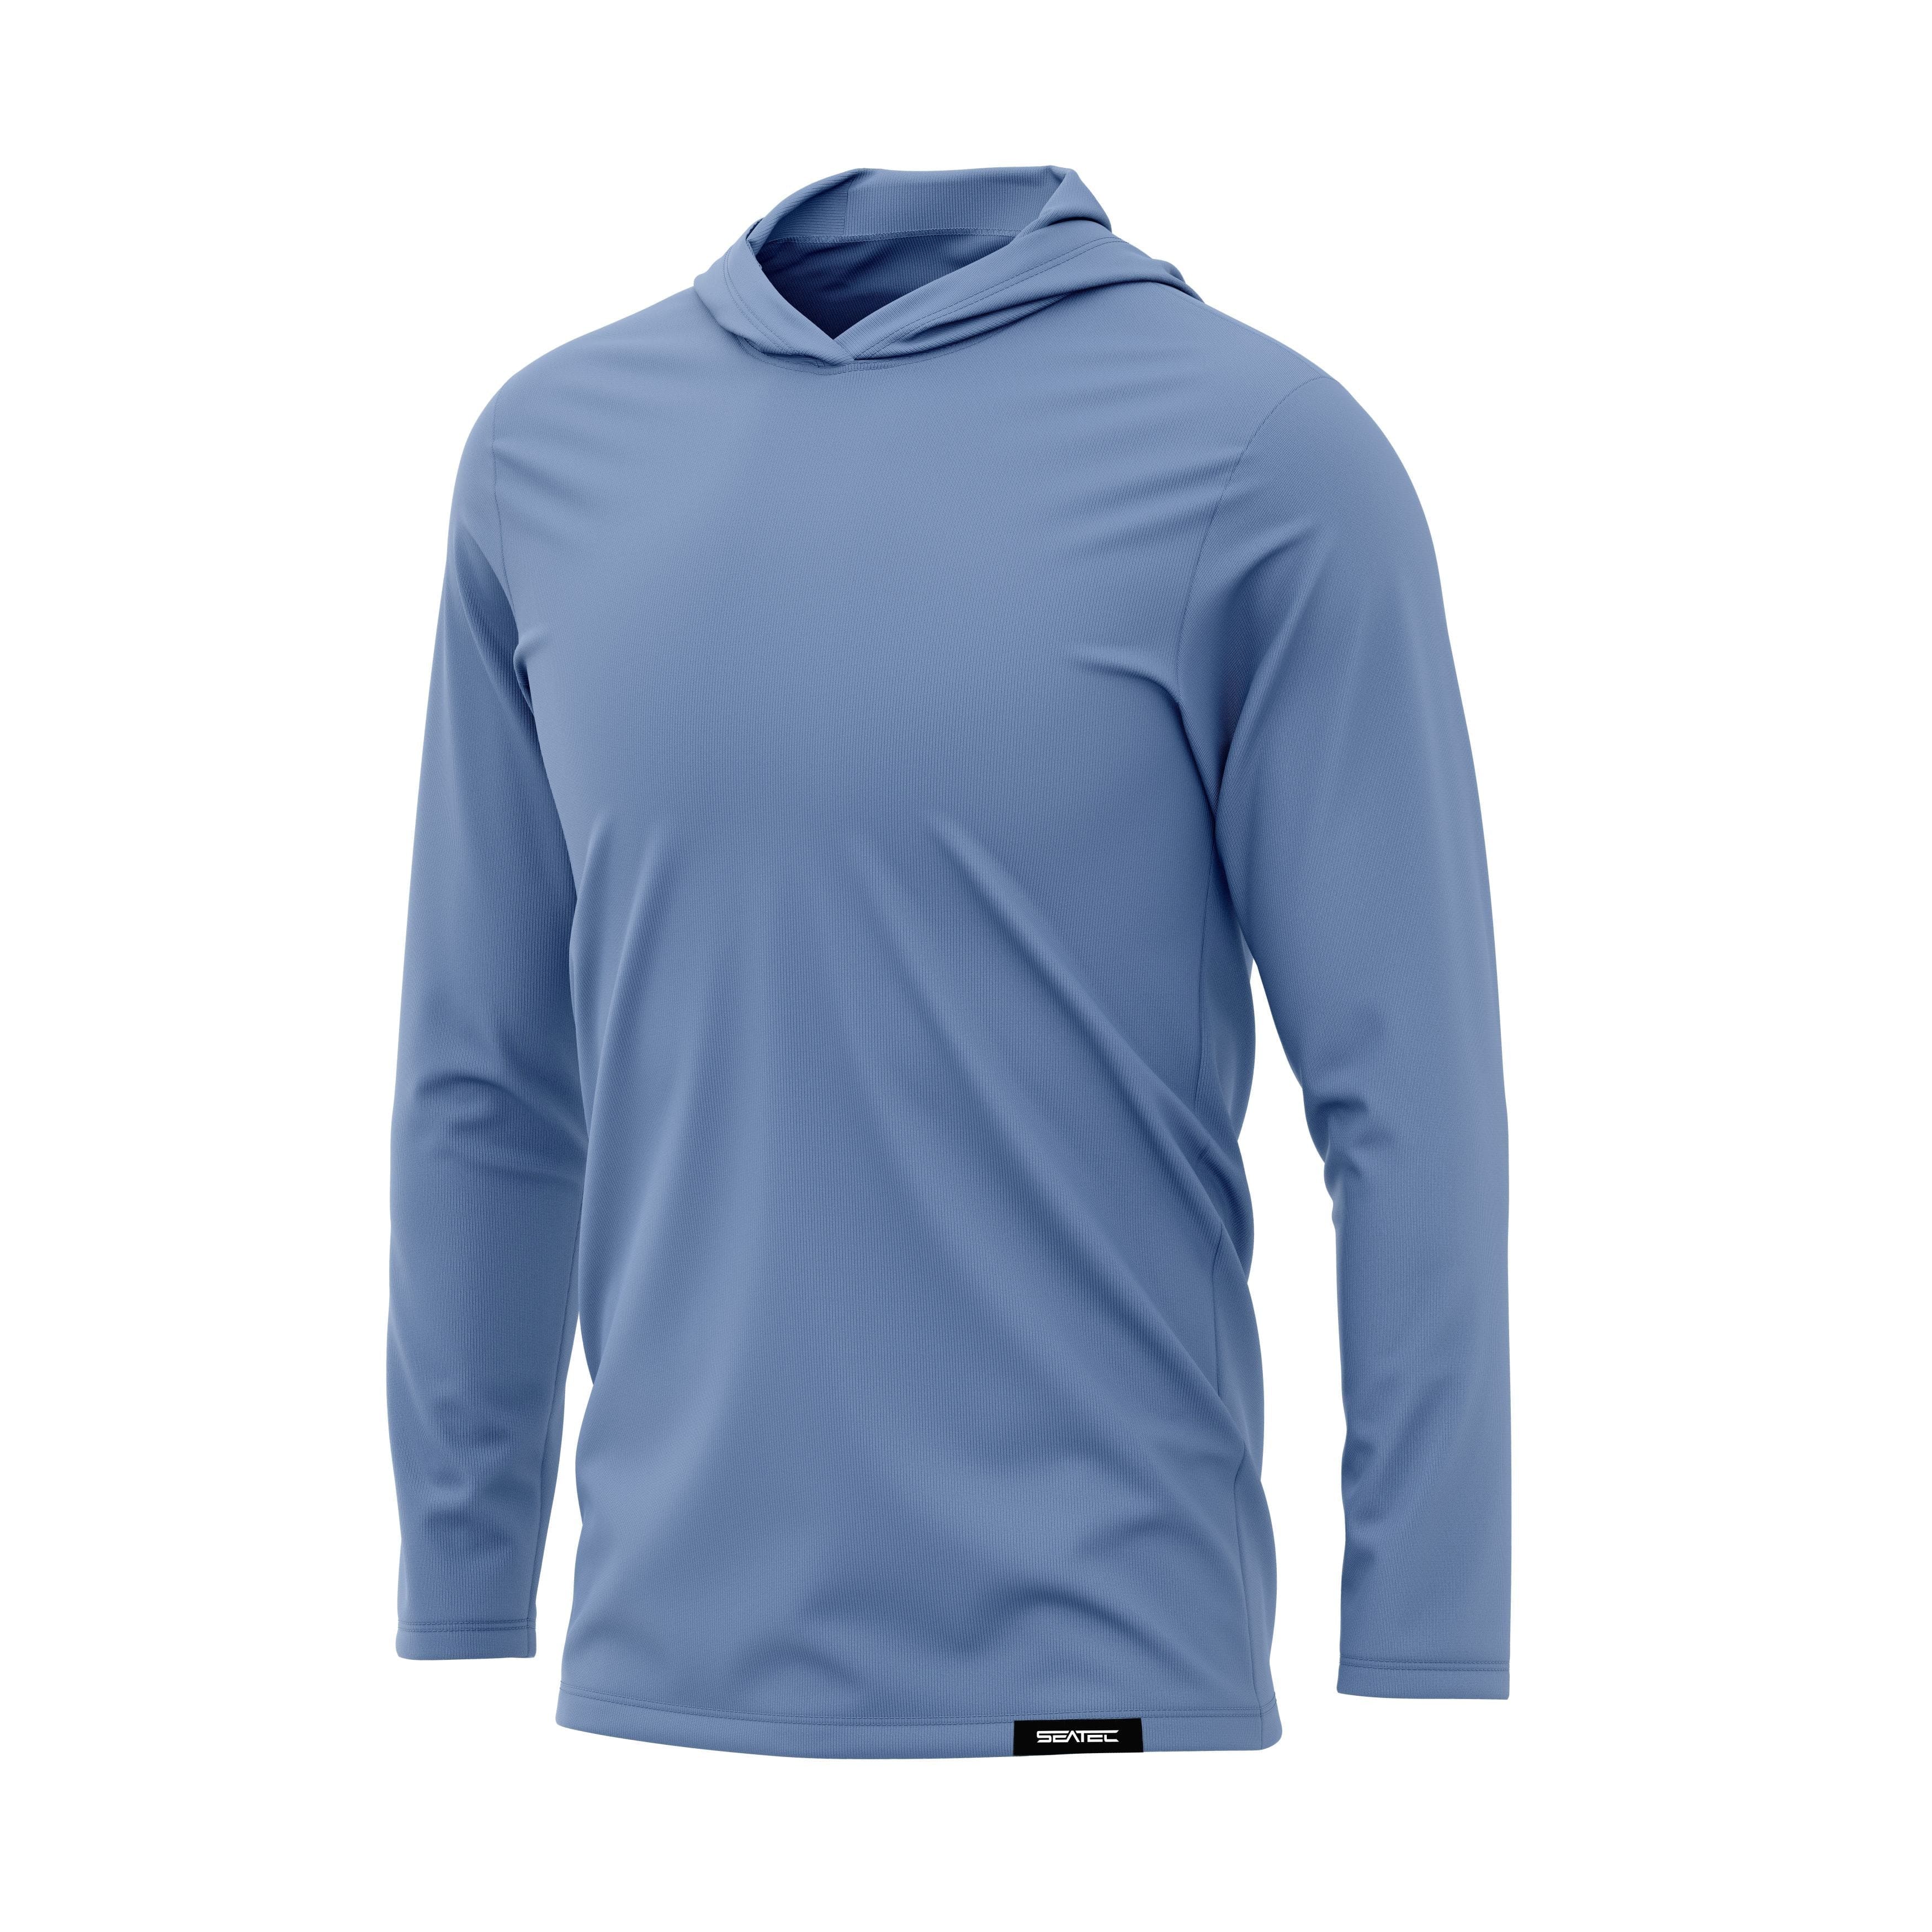 https://www.russells.com/cdn/shop/files/seatec-outfitters-performance-shirts-men-s-active-sky-blue-ls-hooded-36539993424030_5000x.jpg?v=1701985110